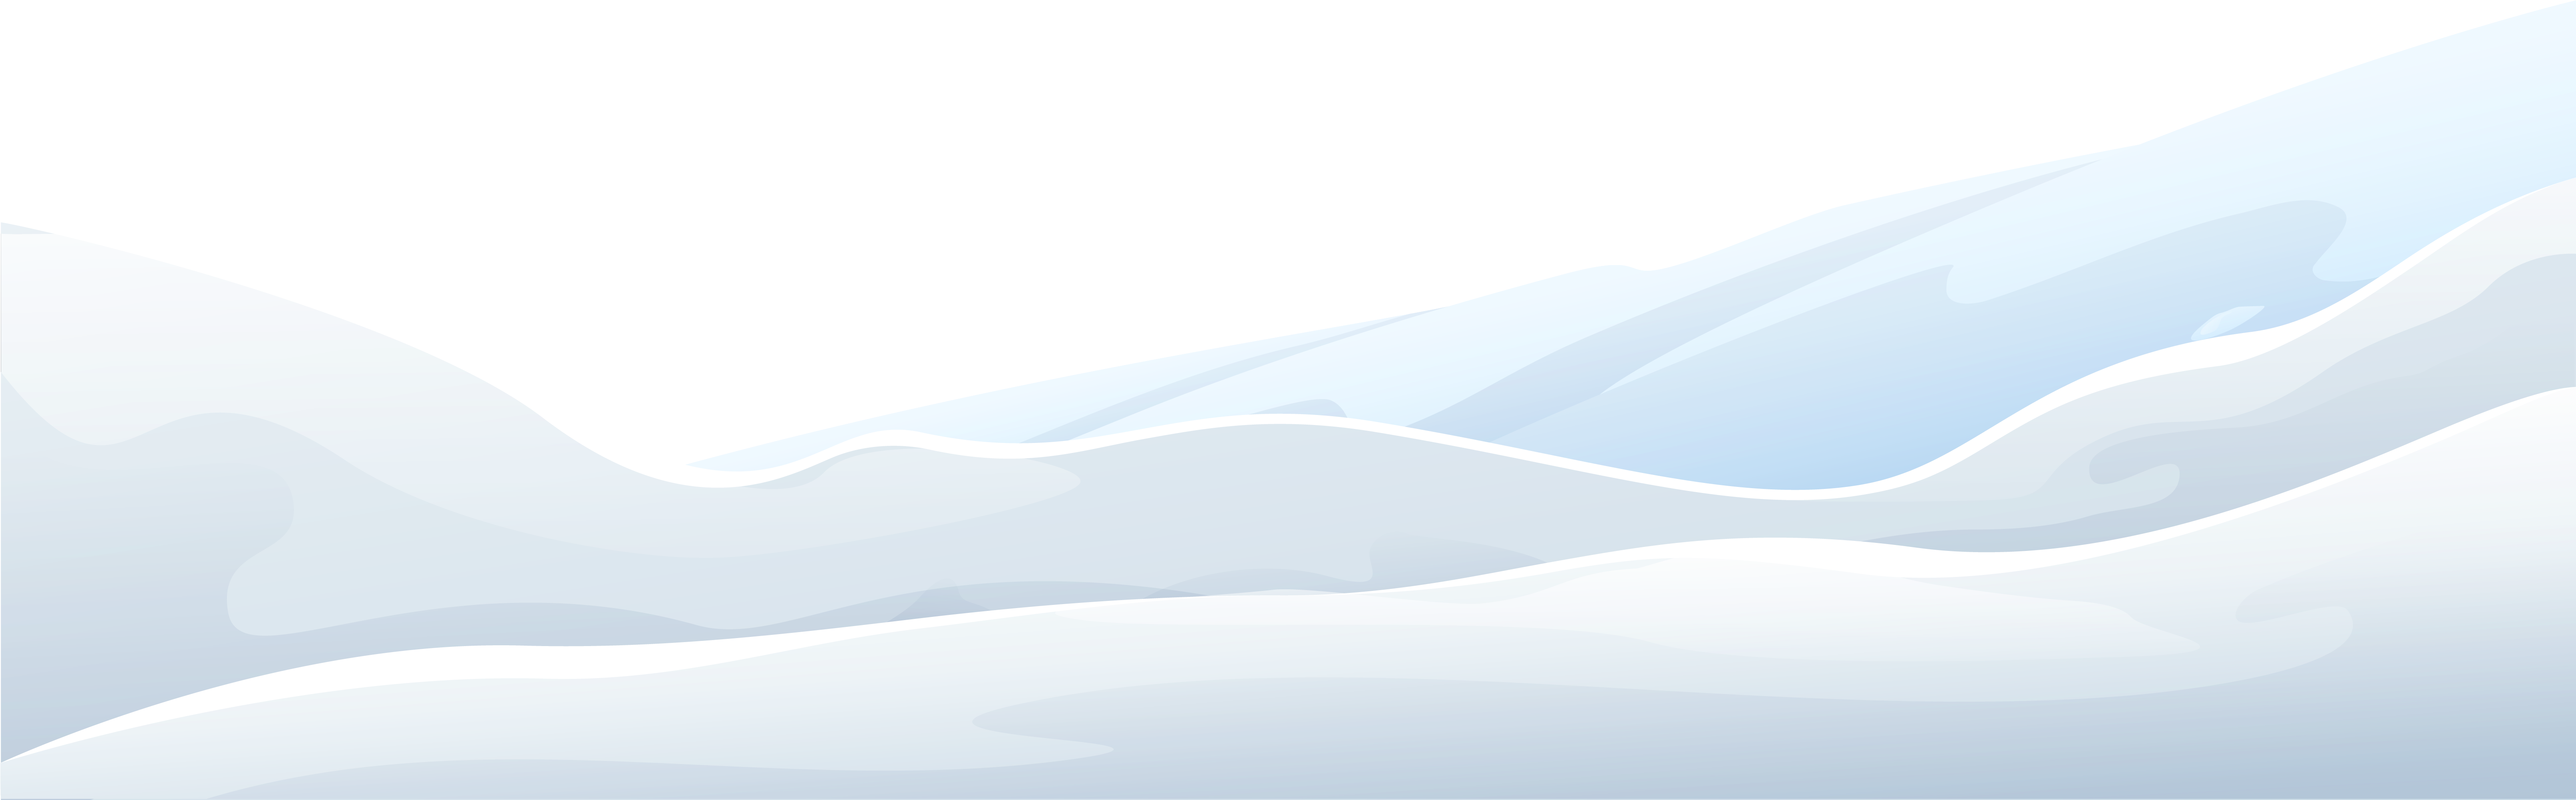 Download Download Snow Winter Clipart Image Snow On Ground Png Png Image With No Background Pngkey Com